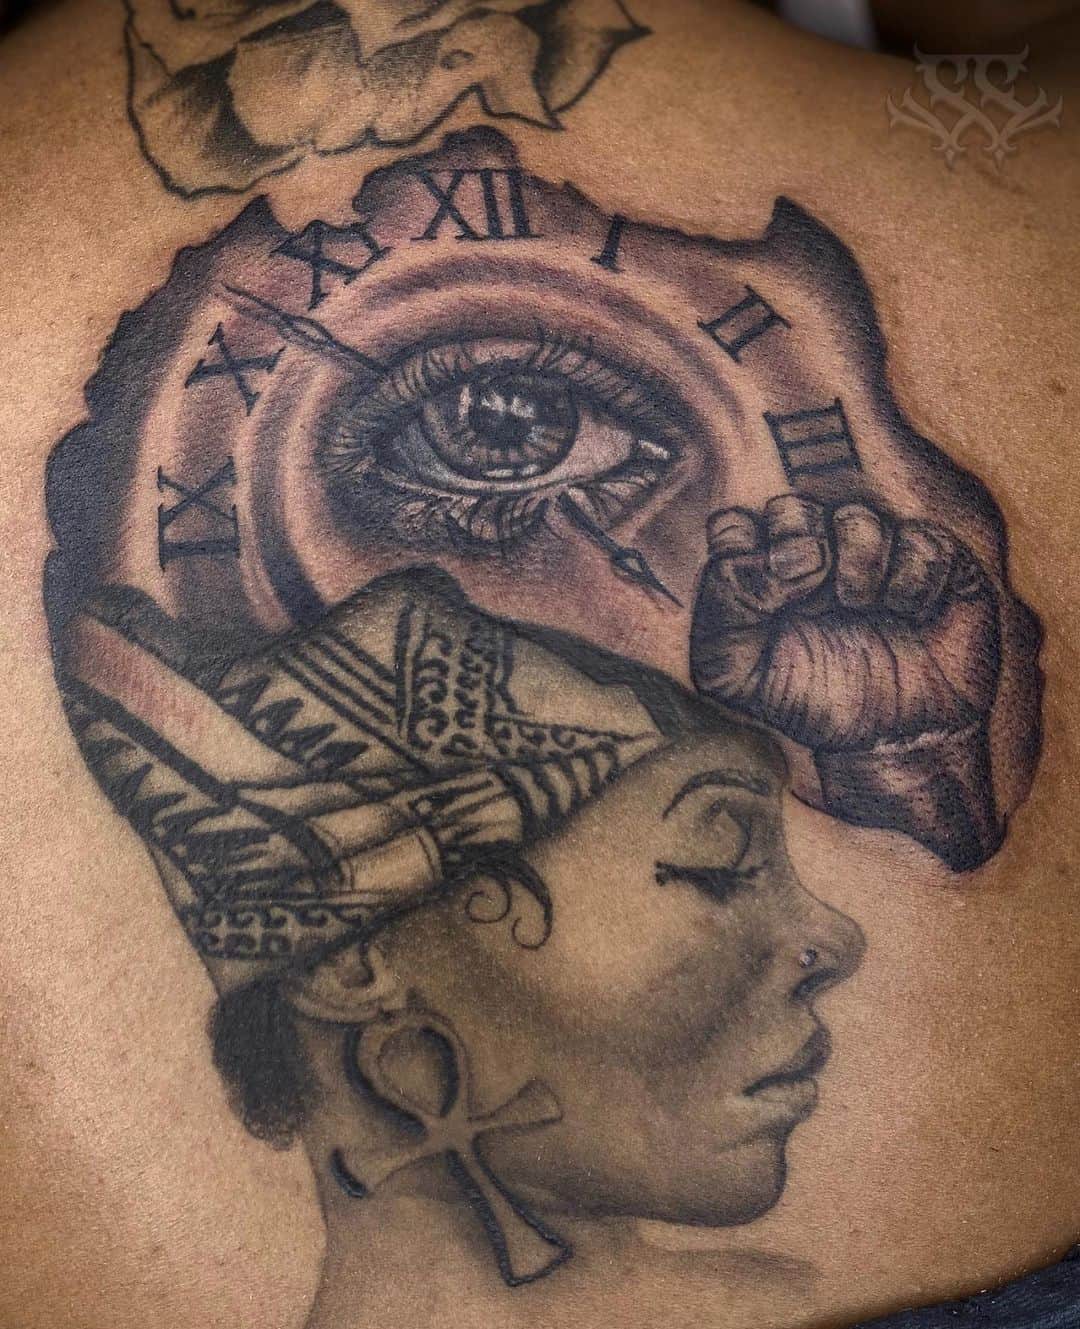 11. African Queen With Clock, Eye, and Ankh.